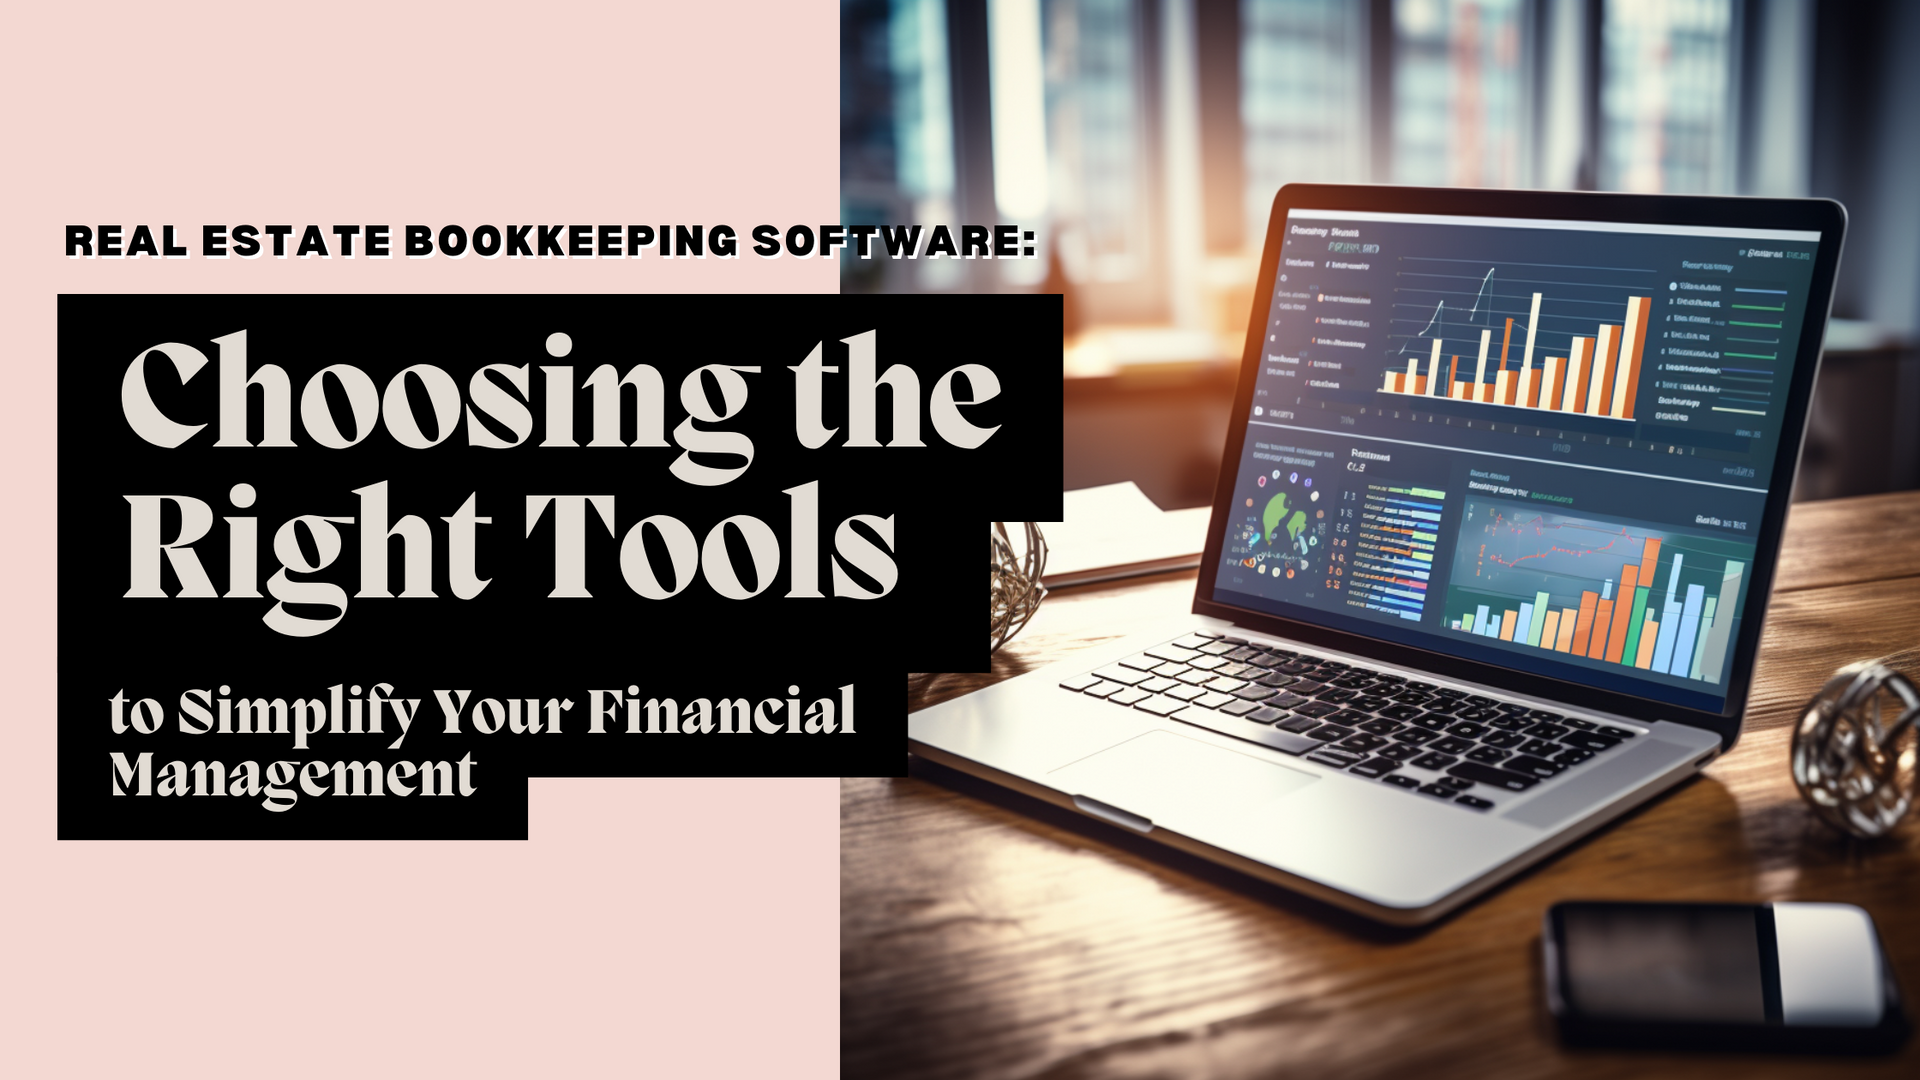 Real-Estate-Bookkeeping-Software-Choosing-the-Right-Tools-to-Simplify-Your-Financial-Management